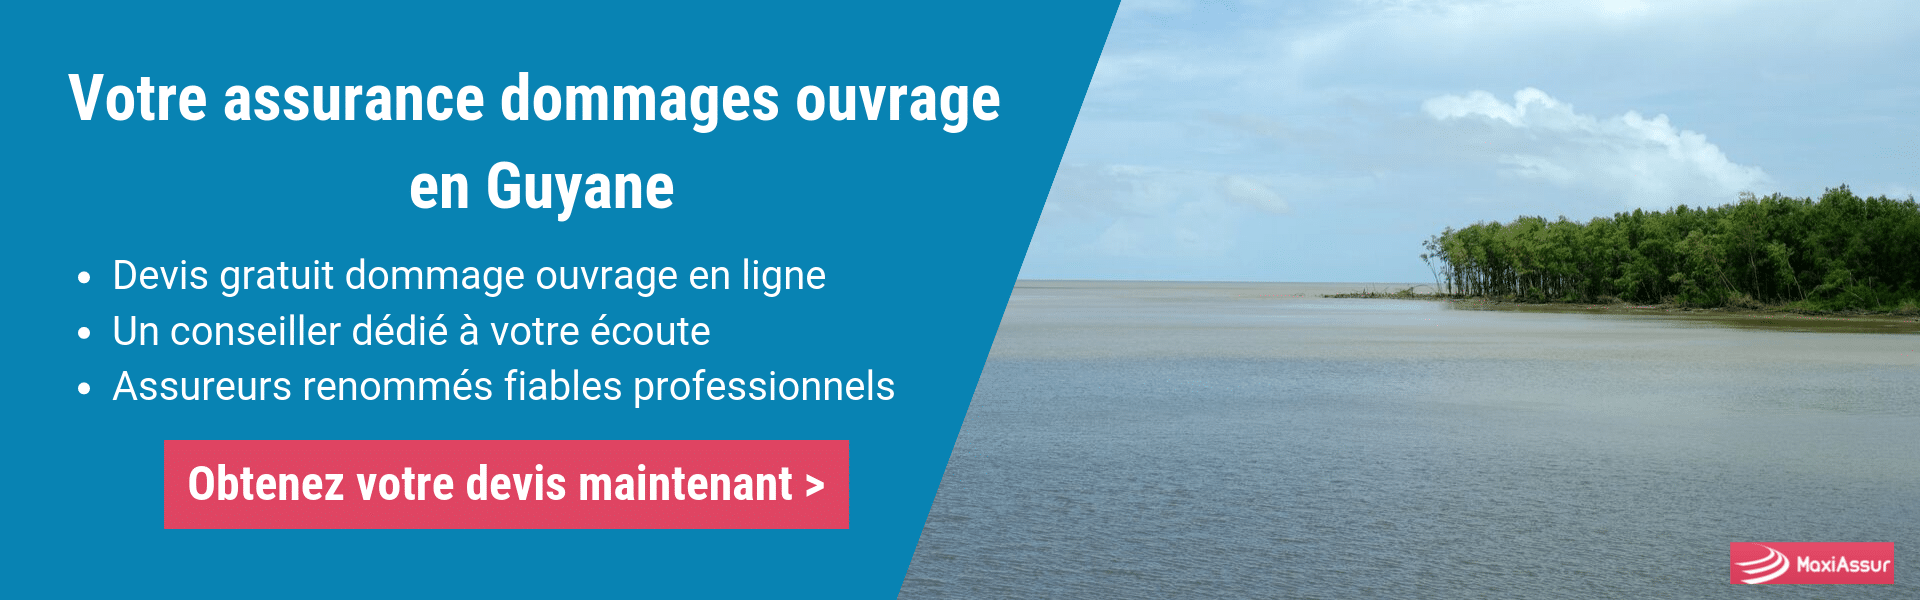 Assurance Dommages Ouvrage Guyane